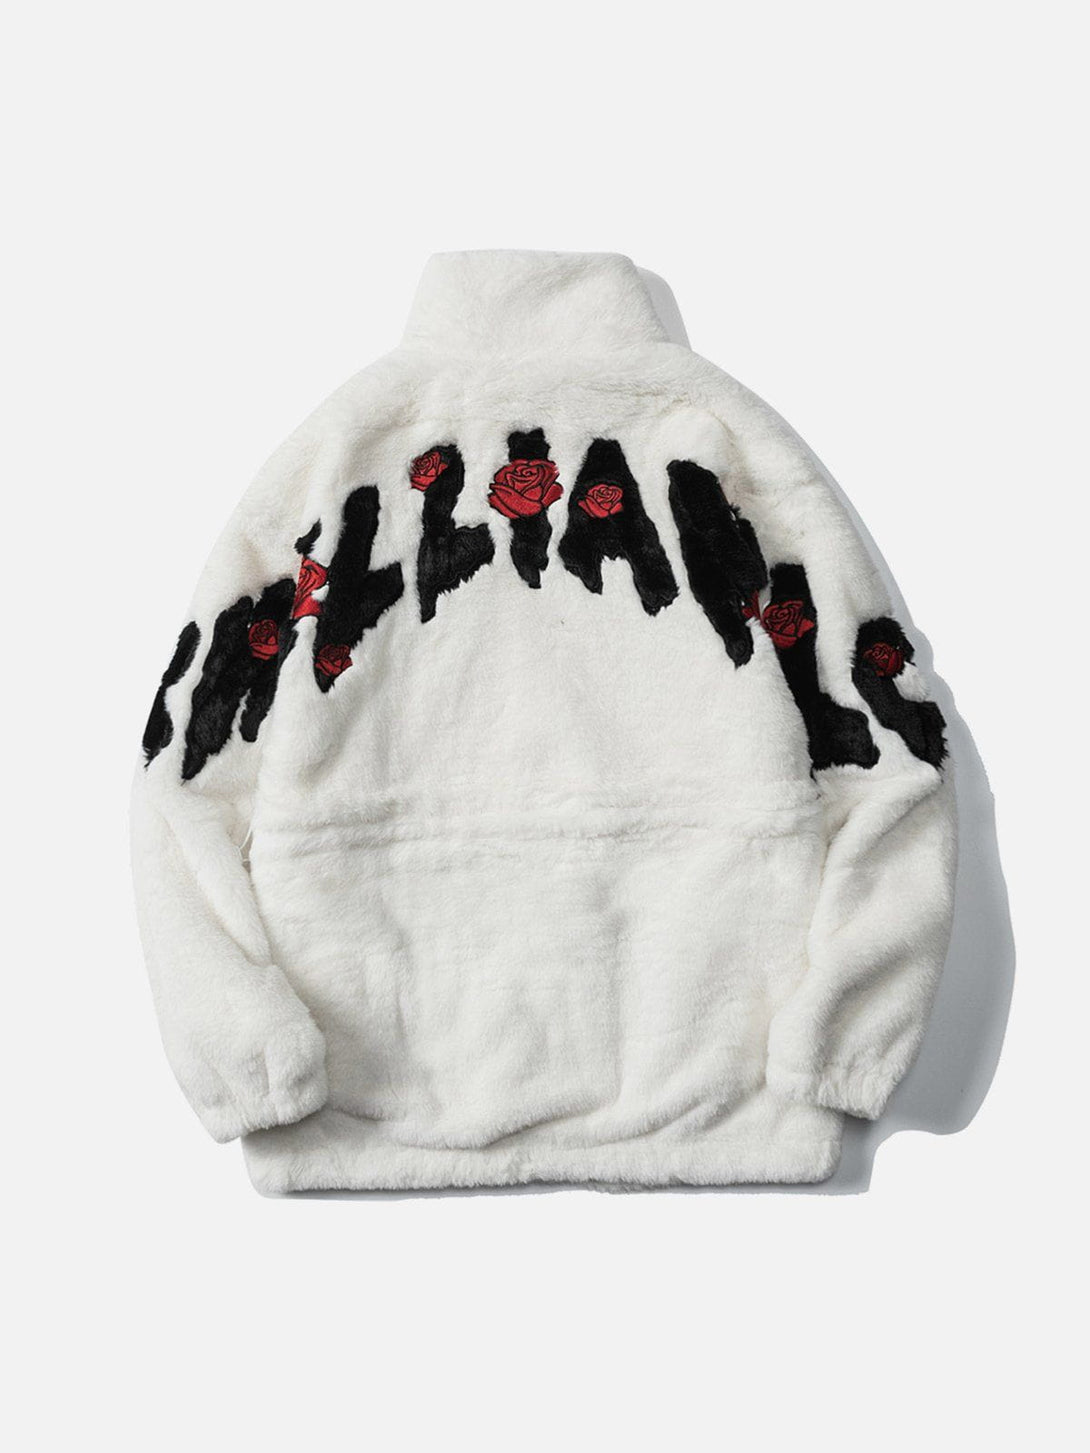 Majesda® - Embroidered Rose Letter Two Wear Sherpa Coat outfit ideas, streetwear fashion - majesda.com